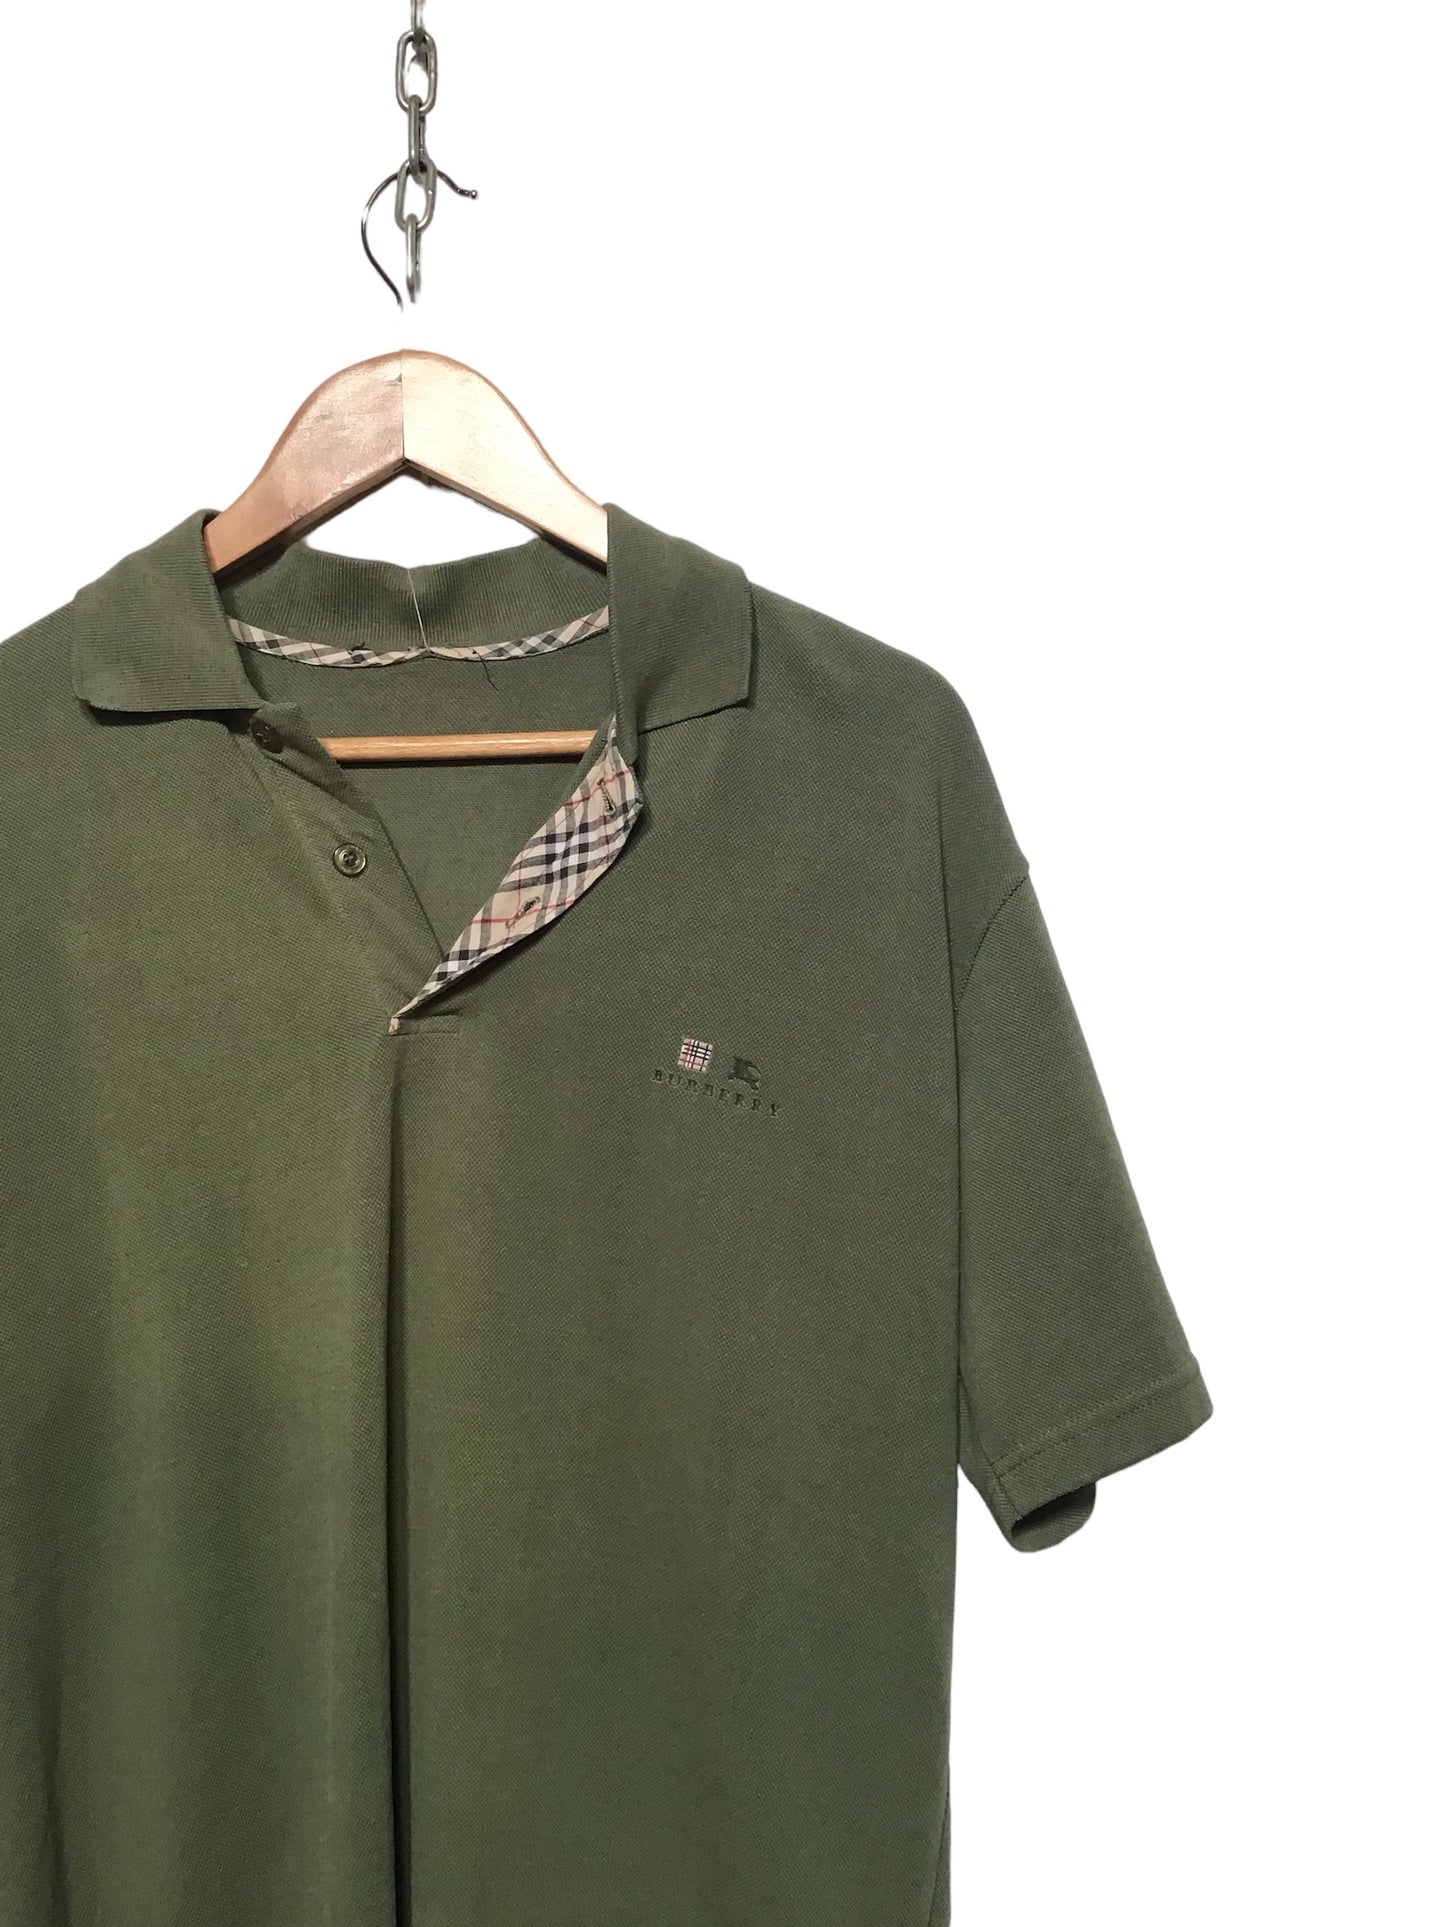 Burberry Polo T-shirt (Size L)